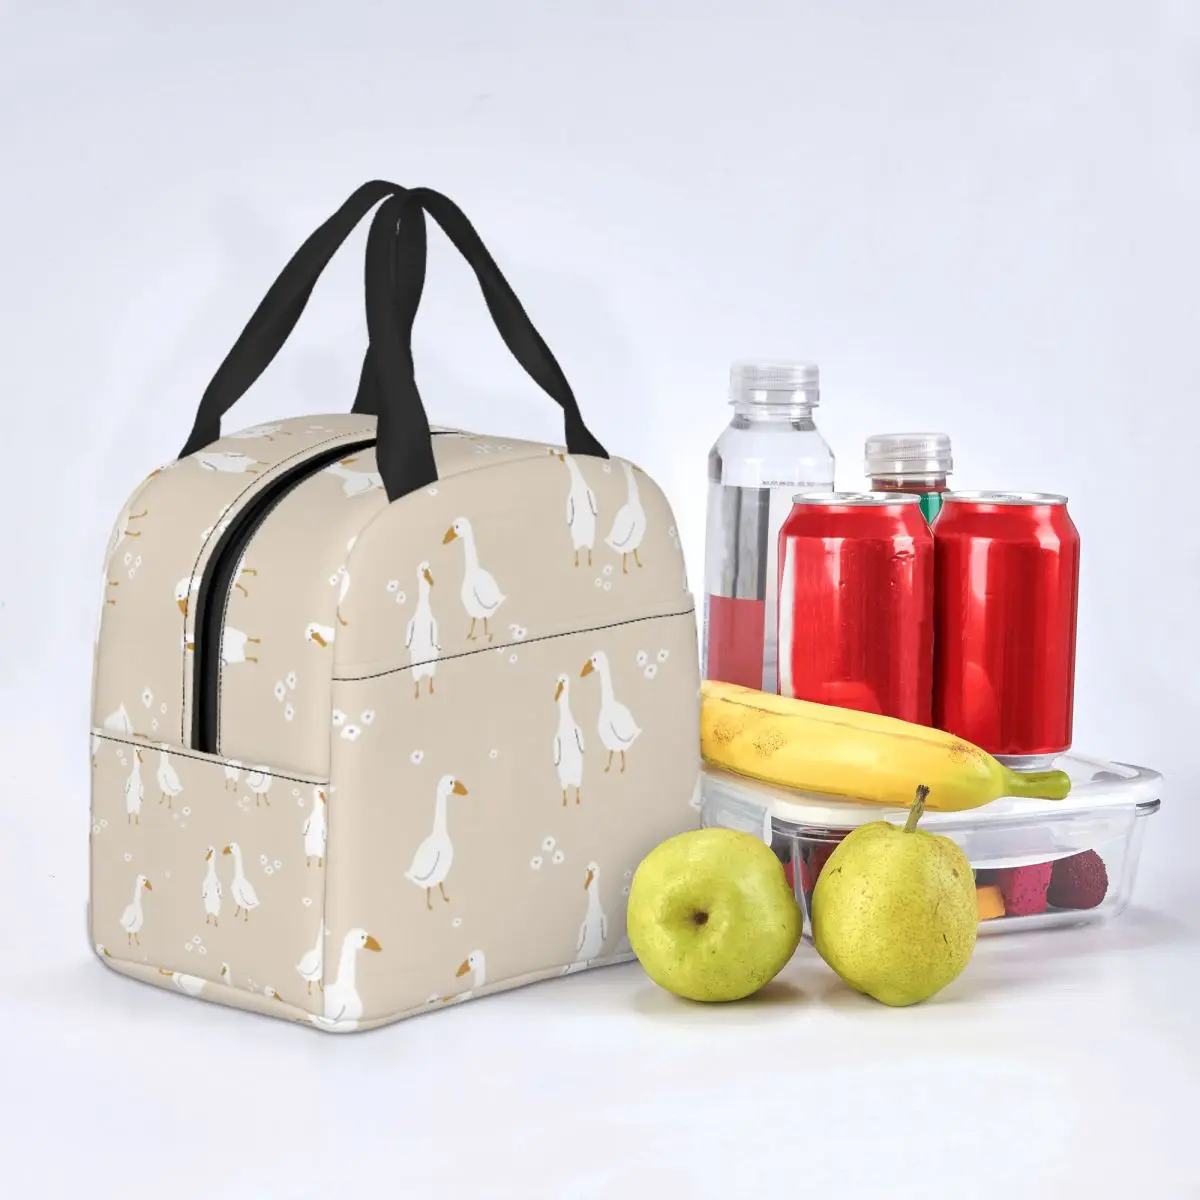 Lunch Bag for Men Women Cute White Gooses Thermal Cooler Bag Portable Picnic Travel Canvas Lunch Box Food Bag